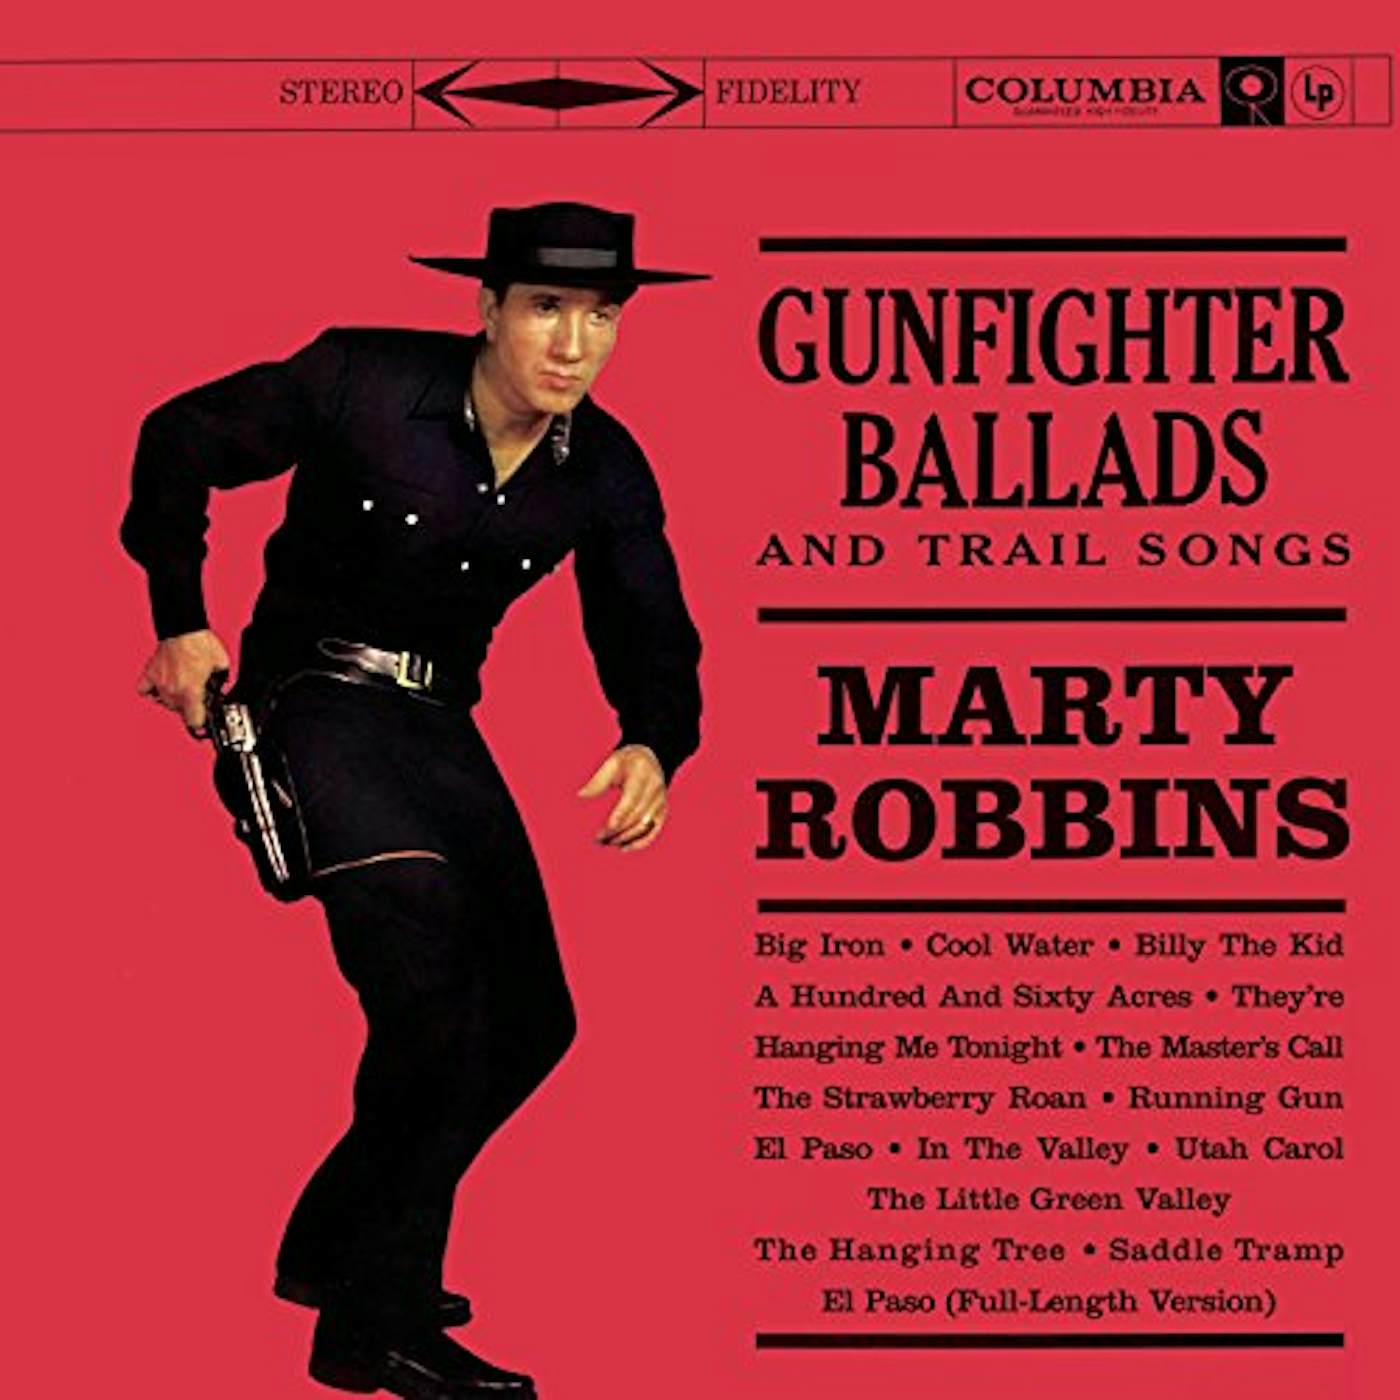 Marty Robbins Gunfighter Ballads And Trail Songs Vinyl Record